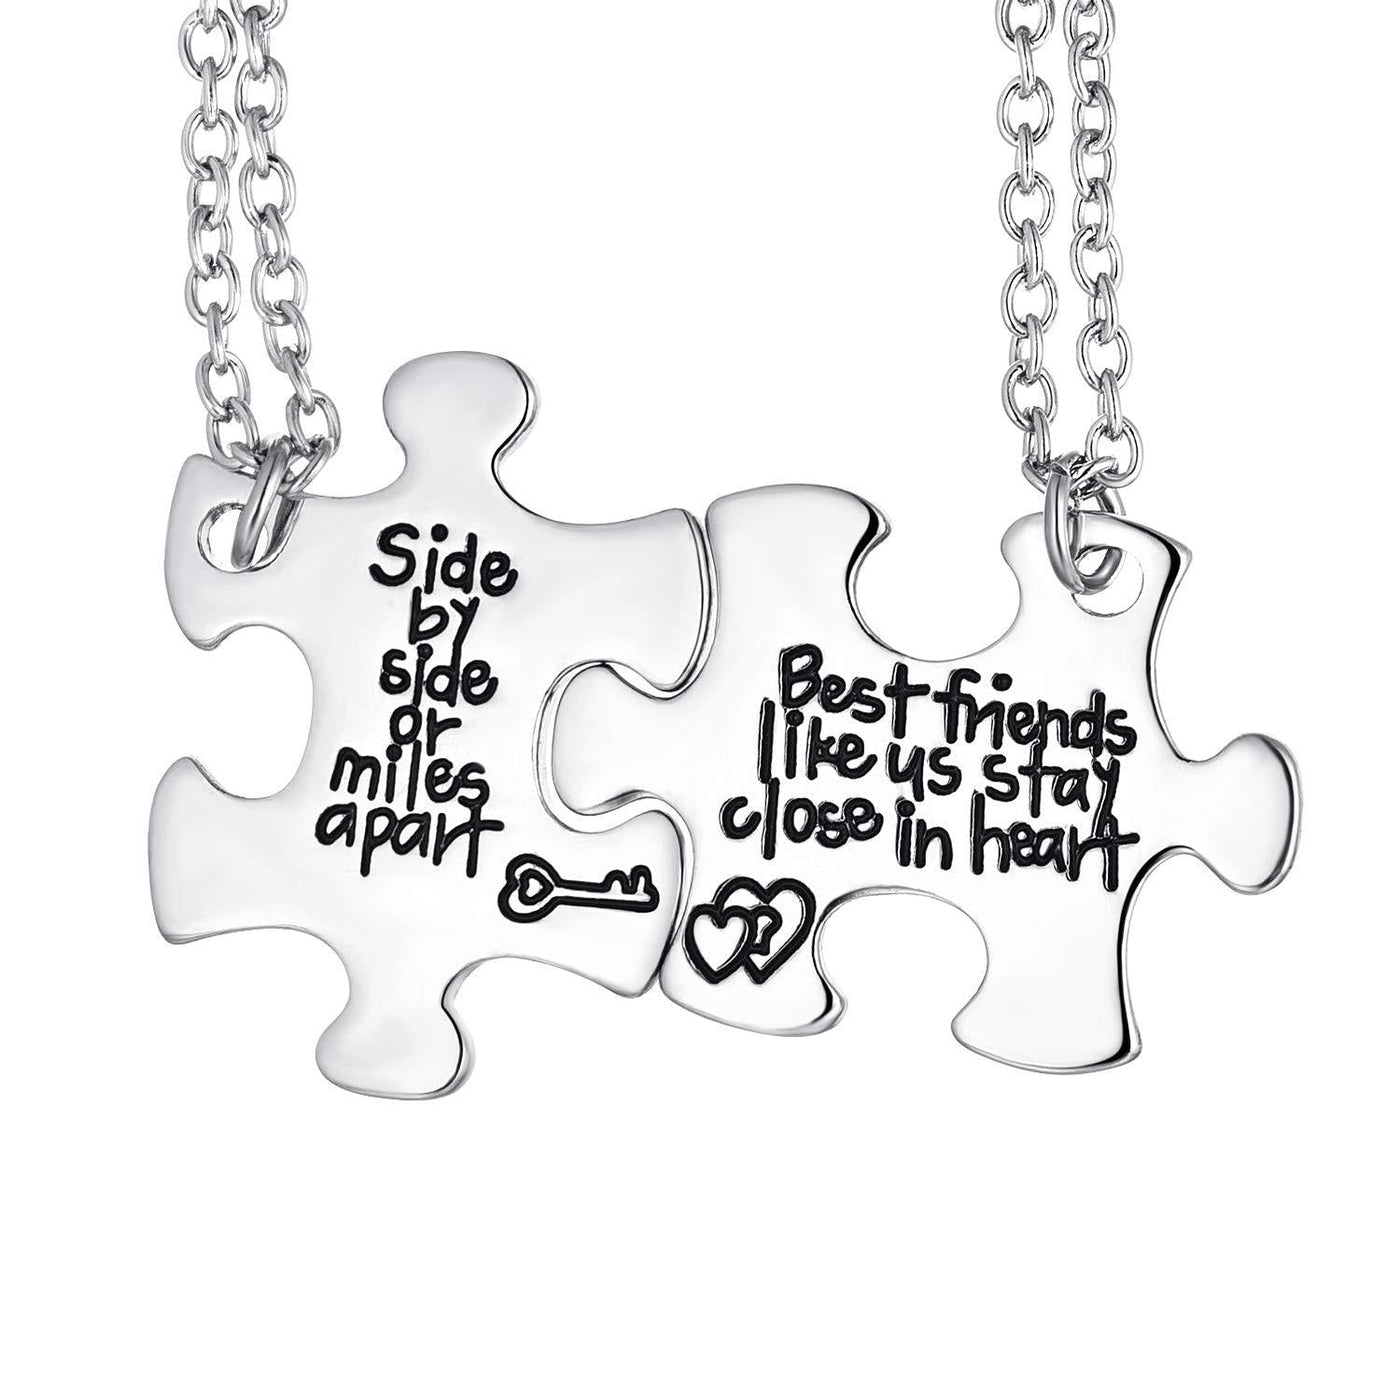 Personalized BFF Necklaces Jewelry Set for 3 Gullei.com | Bff necklaces,  Bff jewelry, Friend necklaces